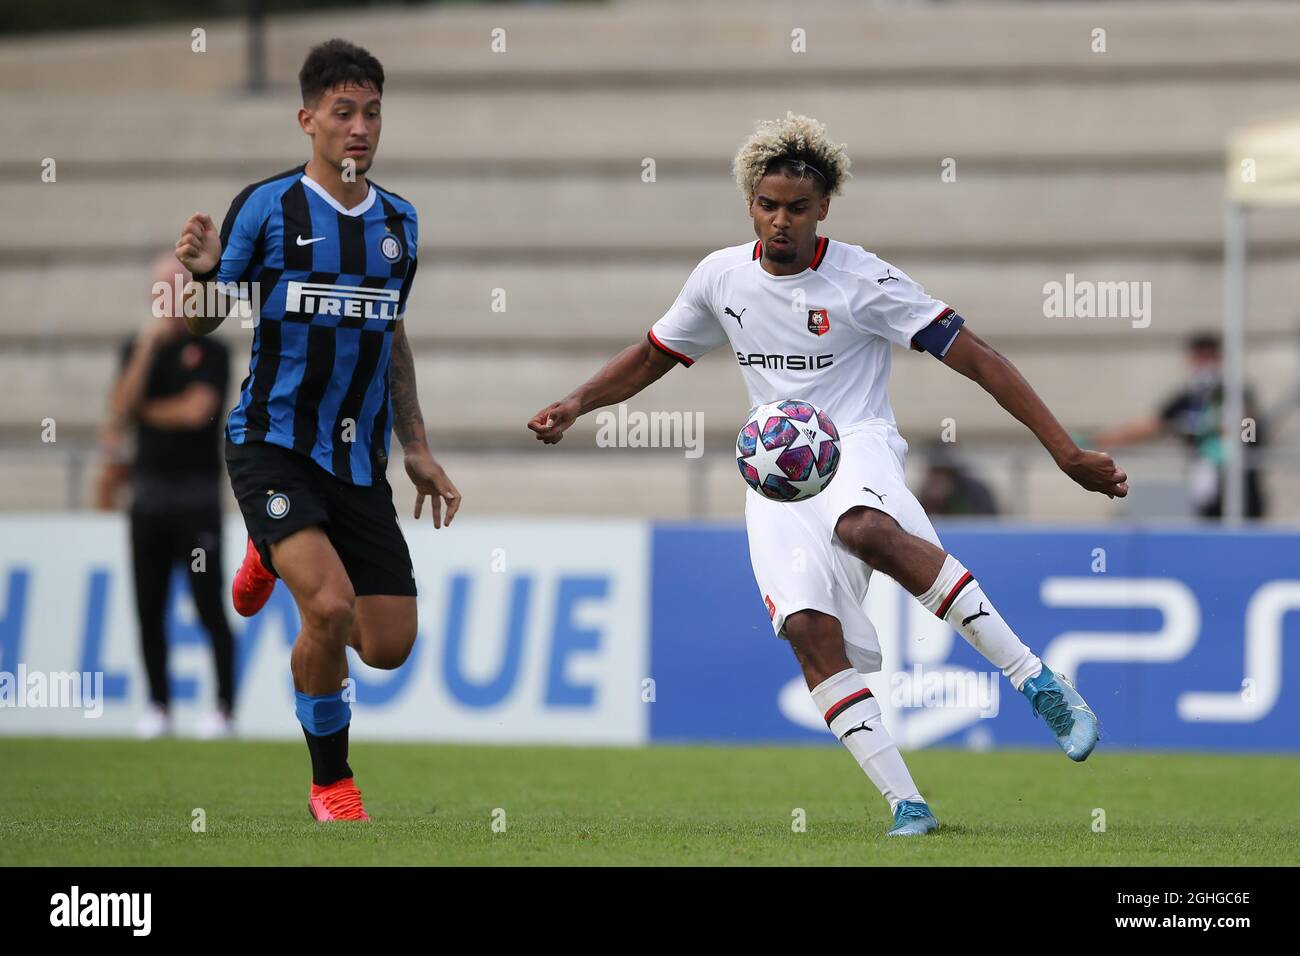 Lorenzo Assignon of Rennais clears the ball from Martin Adrian Satriano Costa of Internazionale during the UEFA Youth League match at Colovray Sports Centre, Nyon. Picture date: 16th August 2020. Picture credit should read: Jonathan Moscrop/Sportimage via PA Images Stock Photo